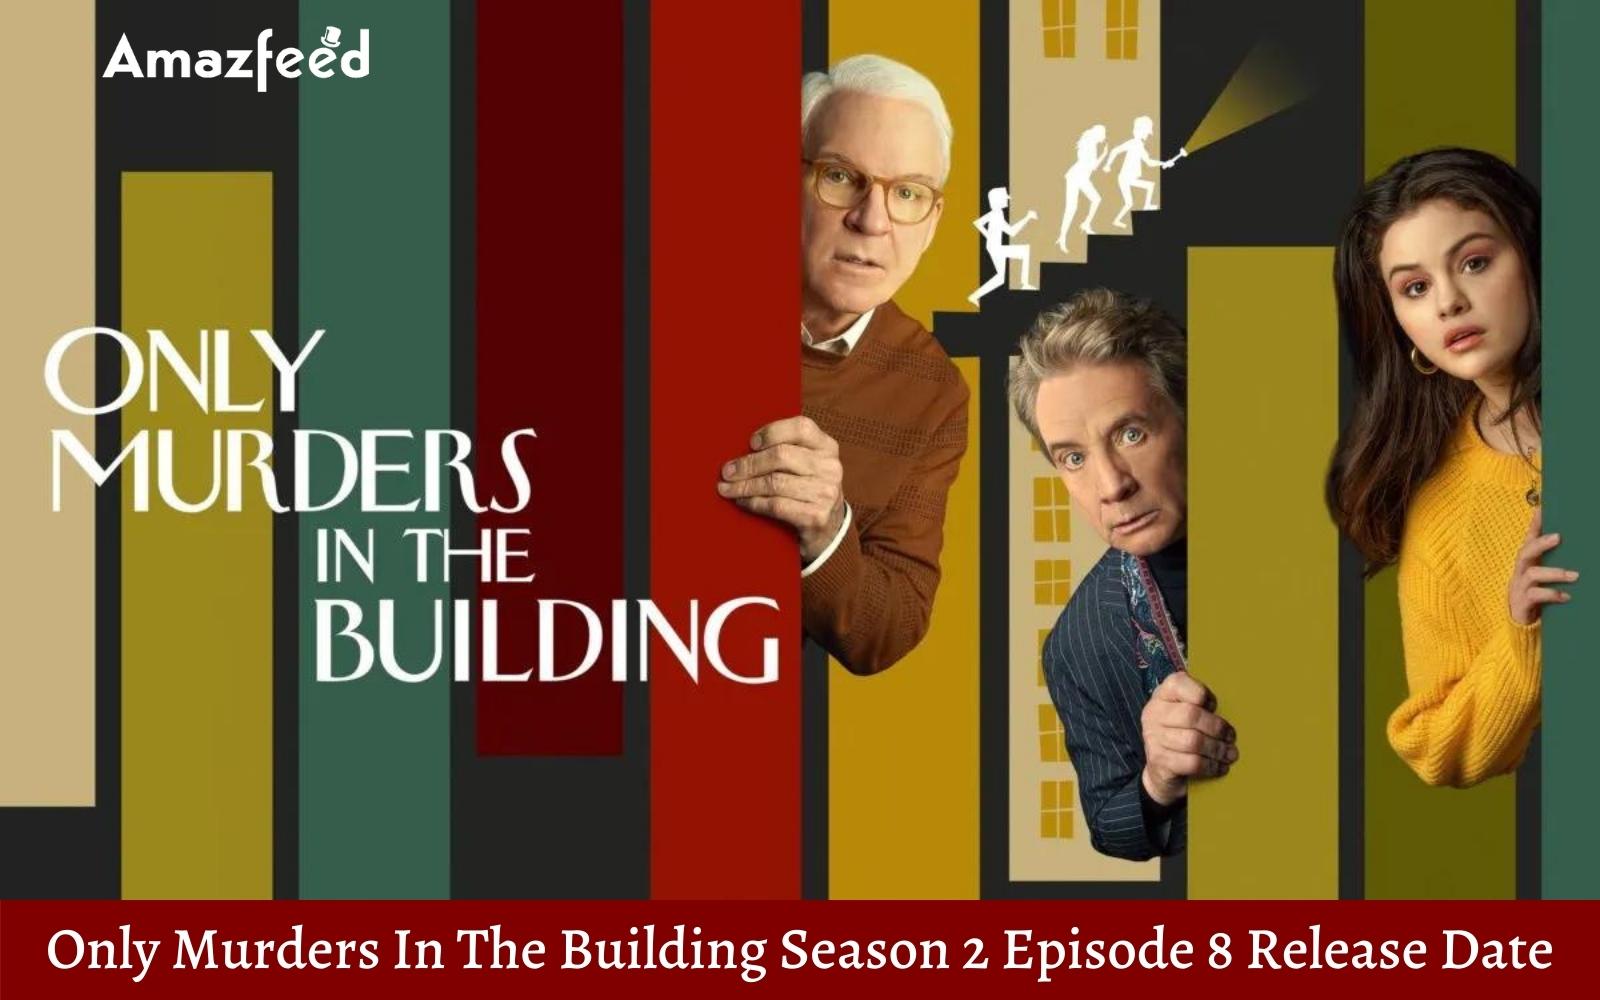 Only Murders In The Building Season 2 Episode 8 ⇒ Countdown, Release Date, Spoilers, Recap, Cast & Where to Watch